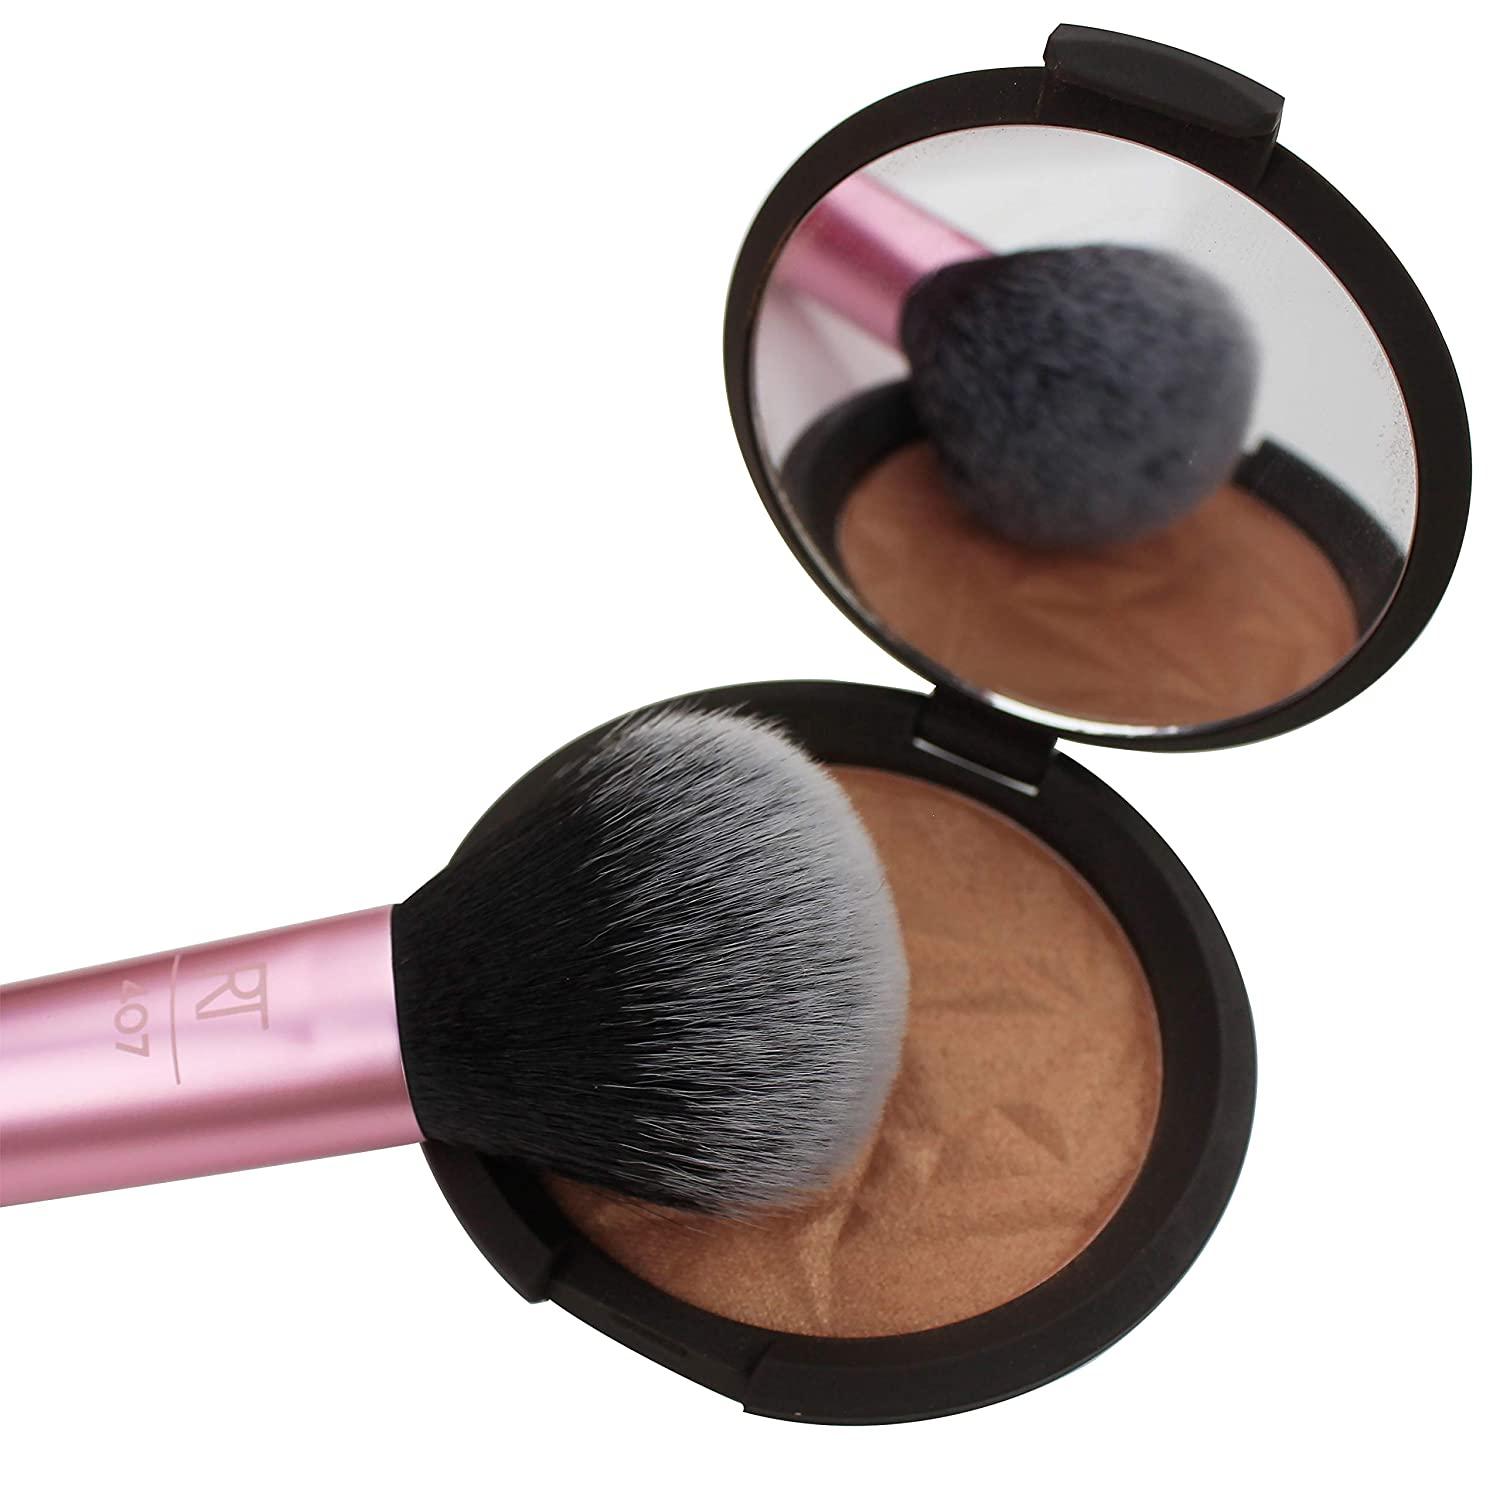 Real Techniques By Sam & Nic Flawless Base Set 2.0 Foundation Brush Set NEW